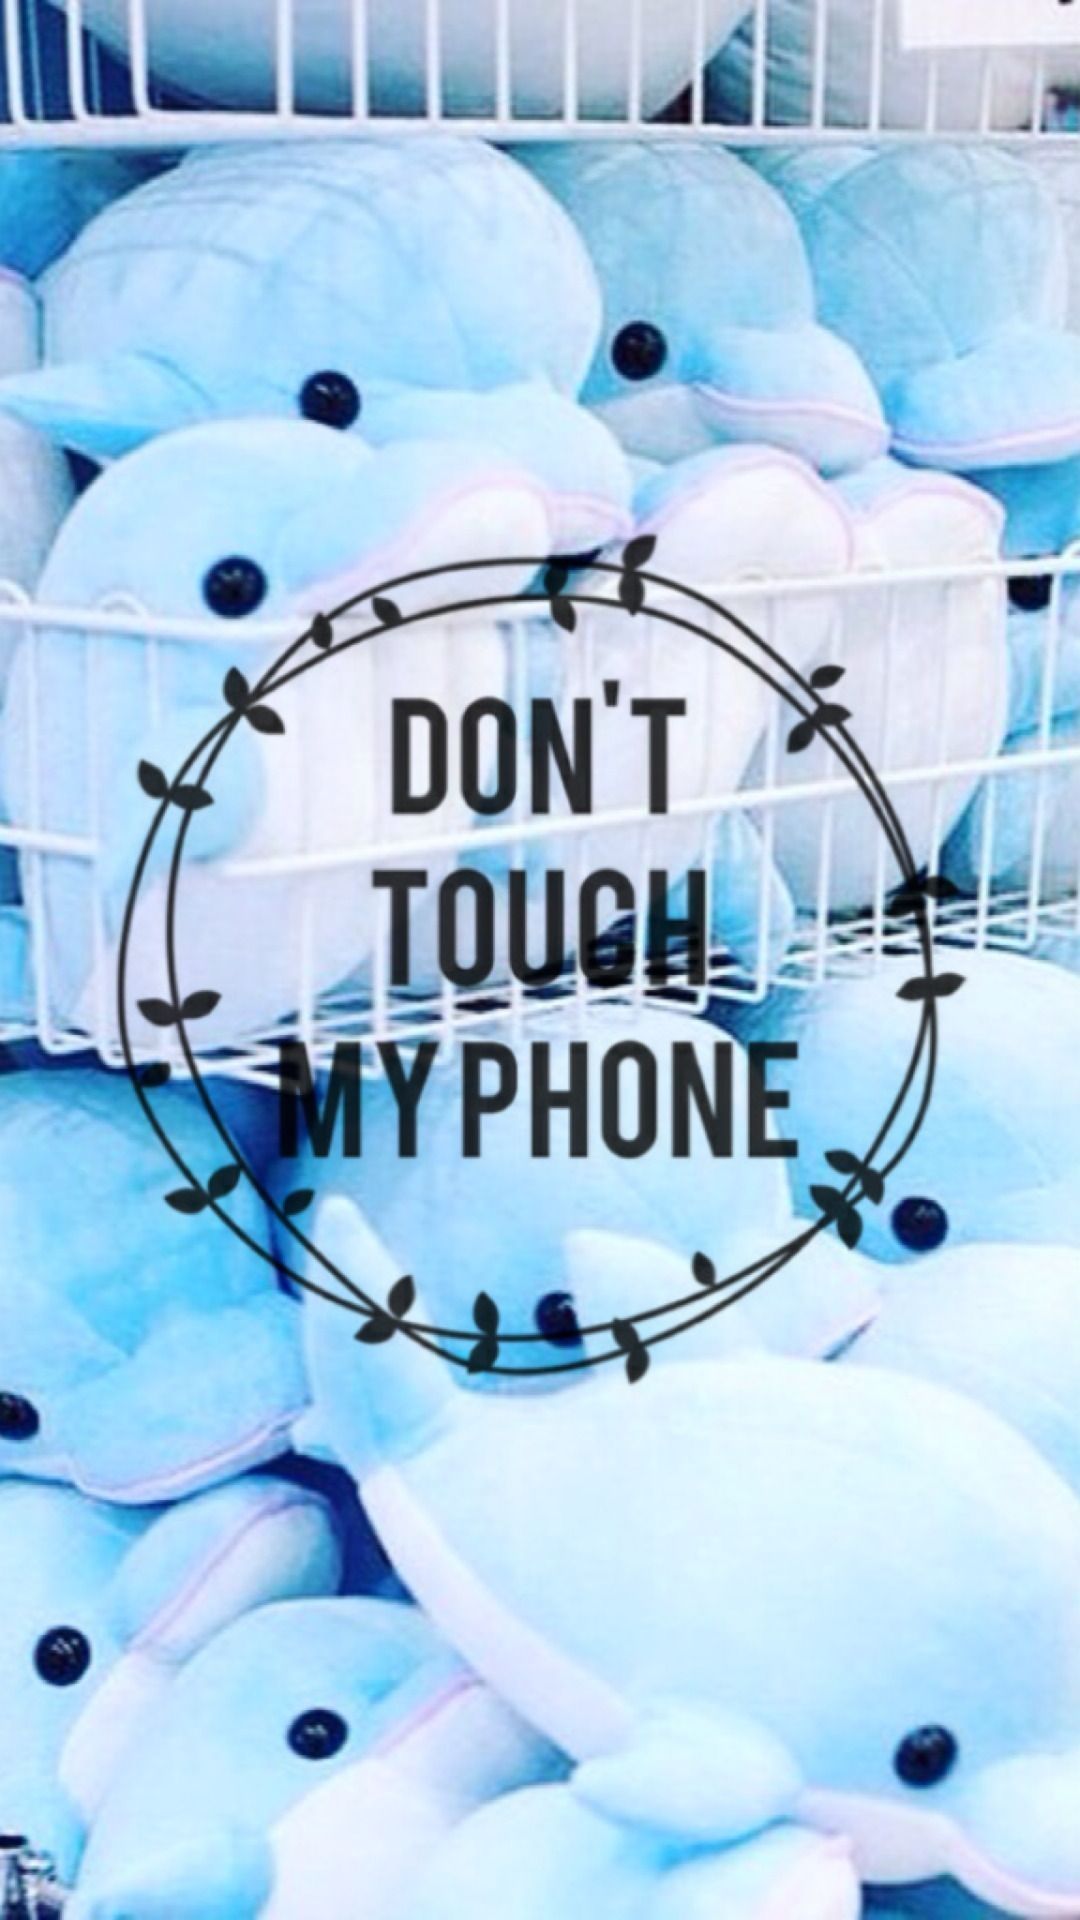 Don't touch my phone wallpaper - Phone, don't touch my phone